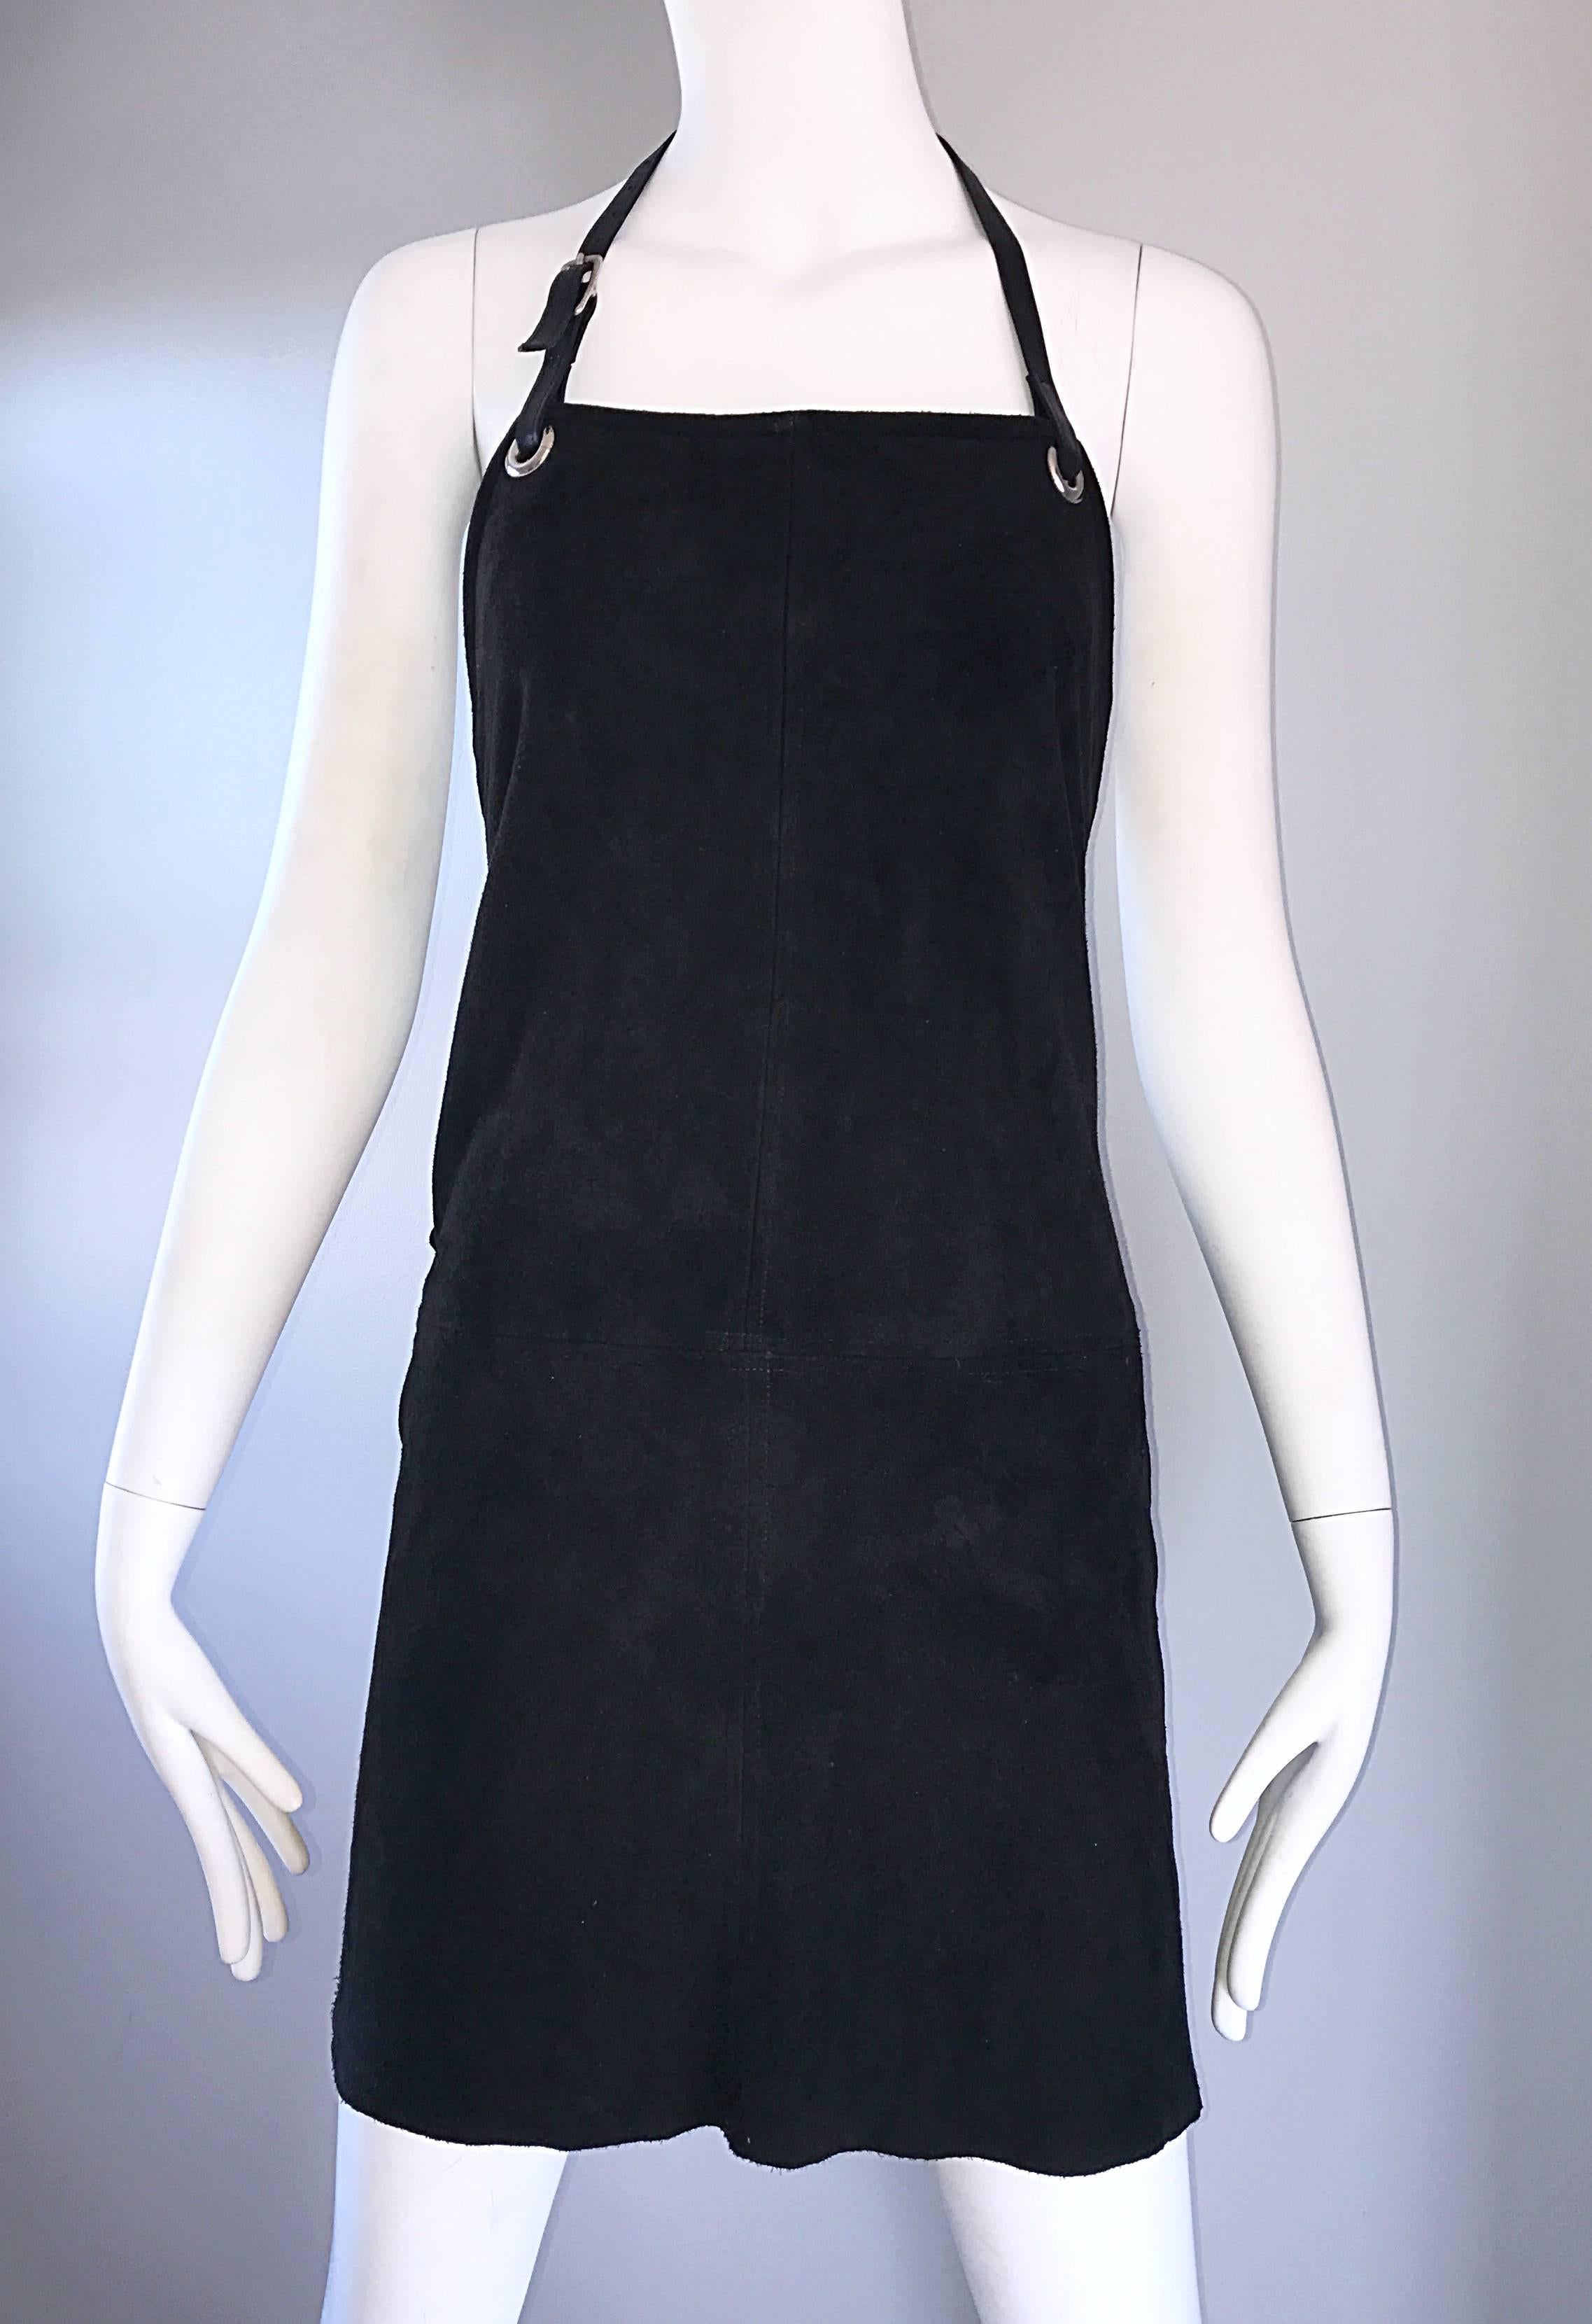 Helmut Lang Early 1990s Rare Black Leather Suede Apron Halter Dress Vintage 90s In Excellent Condition For Sale In San Diego, CA